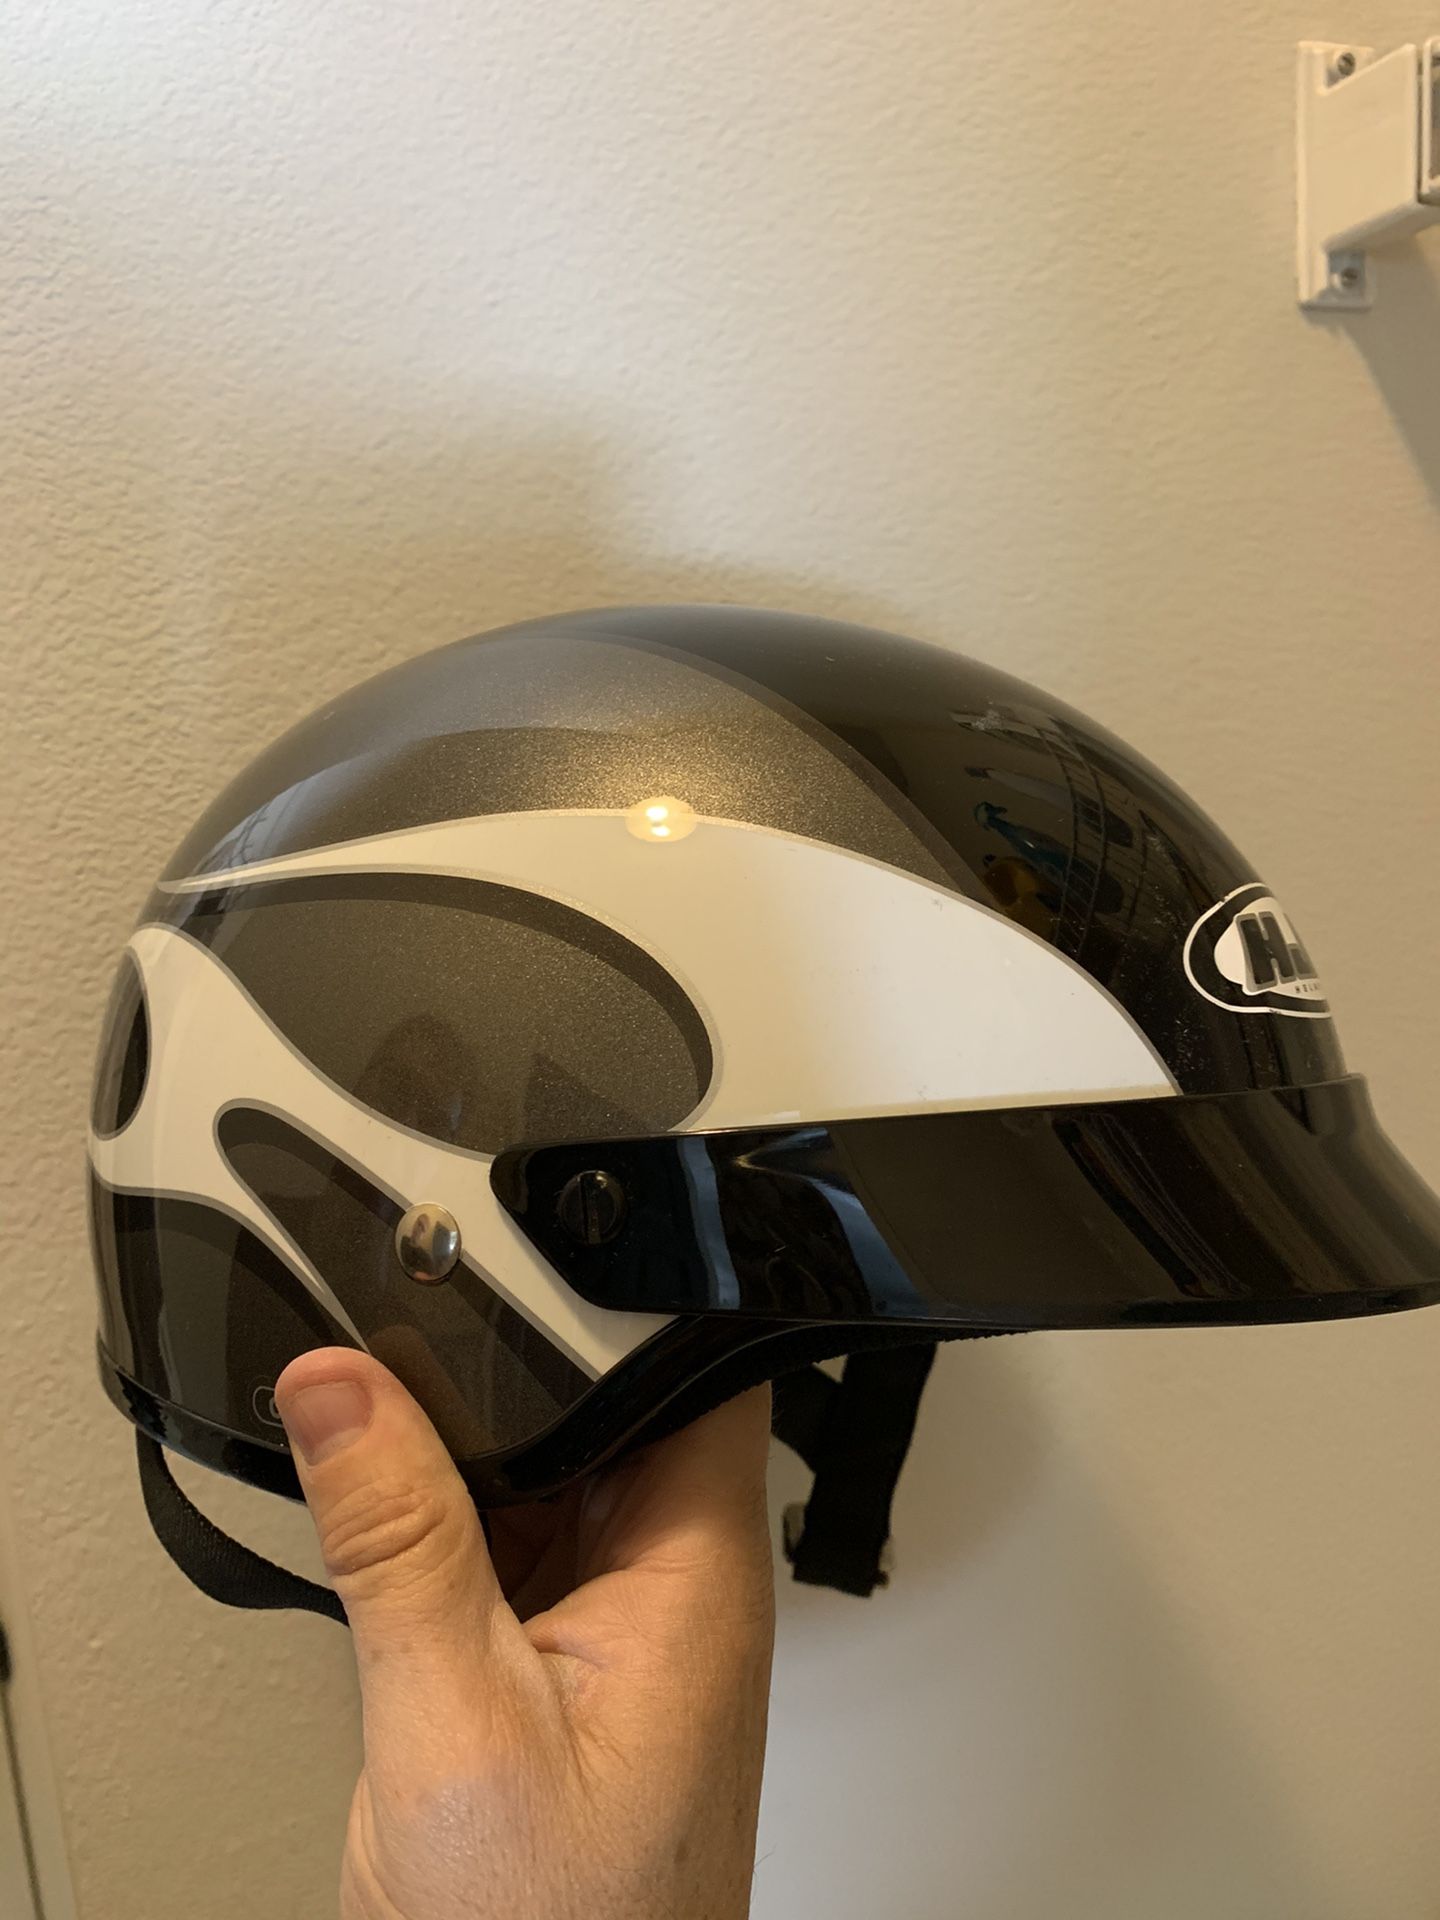 Two motorcycle helmets almost new.